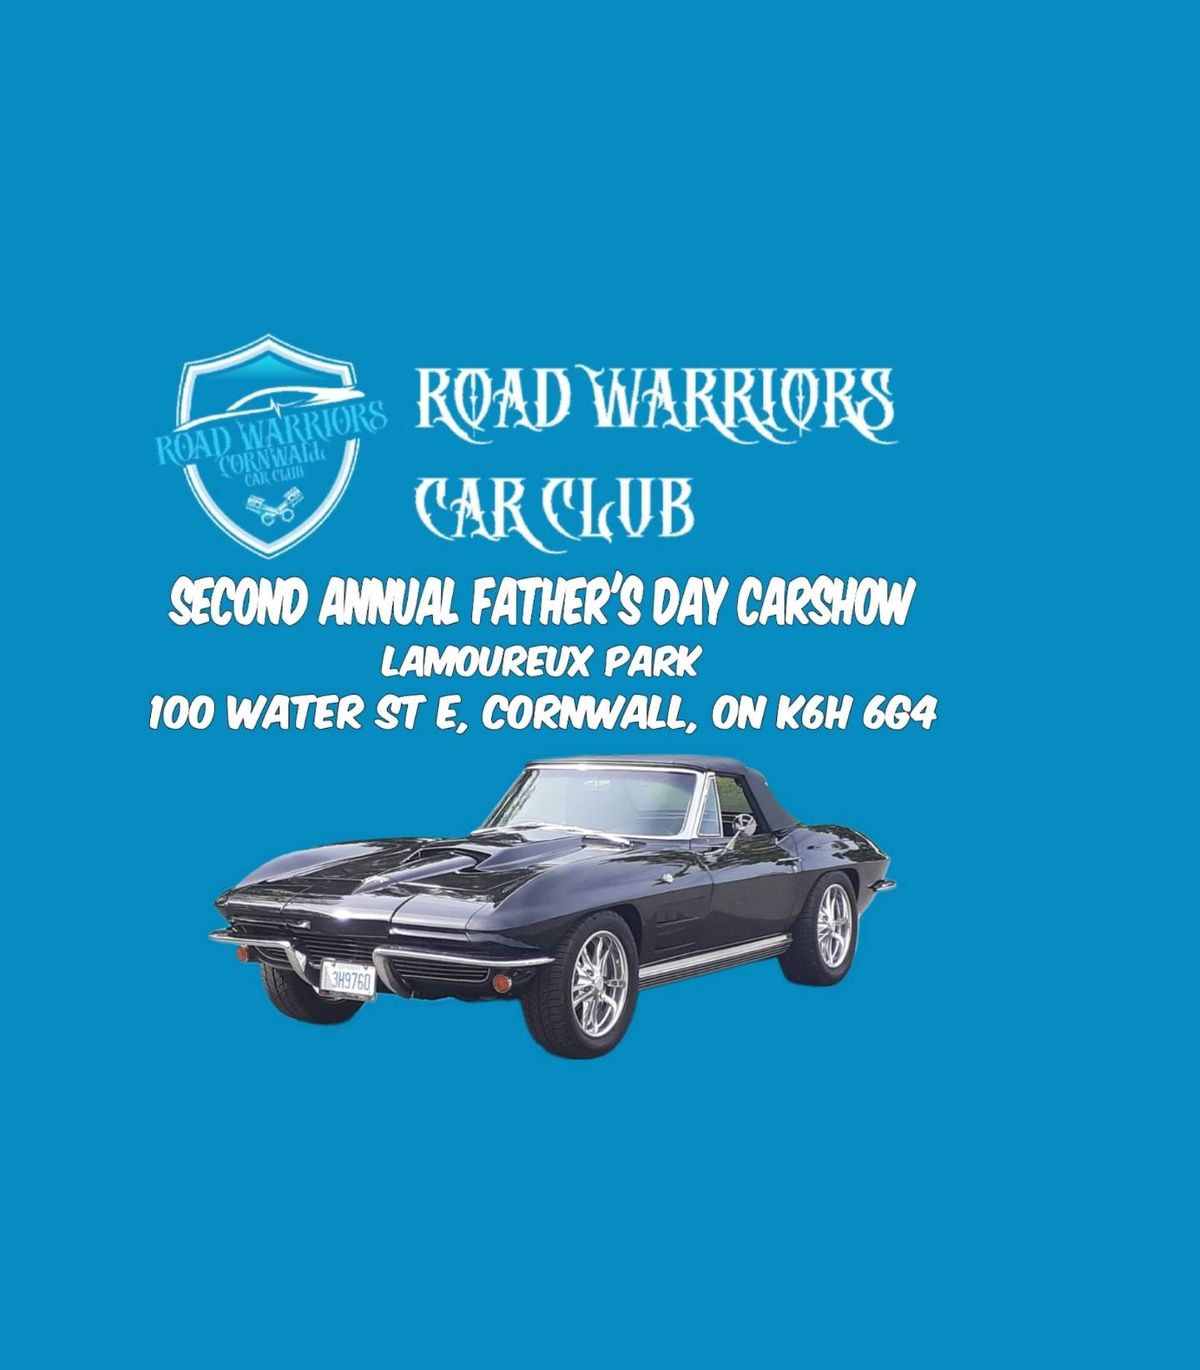 Cornwall Road Warriors Car Club Second Annual Father's Day Carshow\ud83c\udfc6 